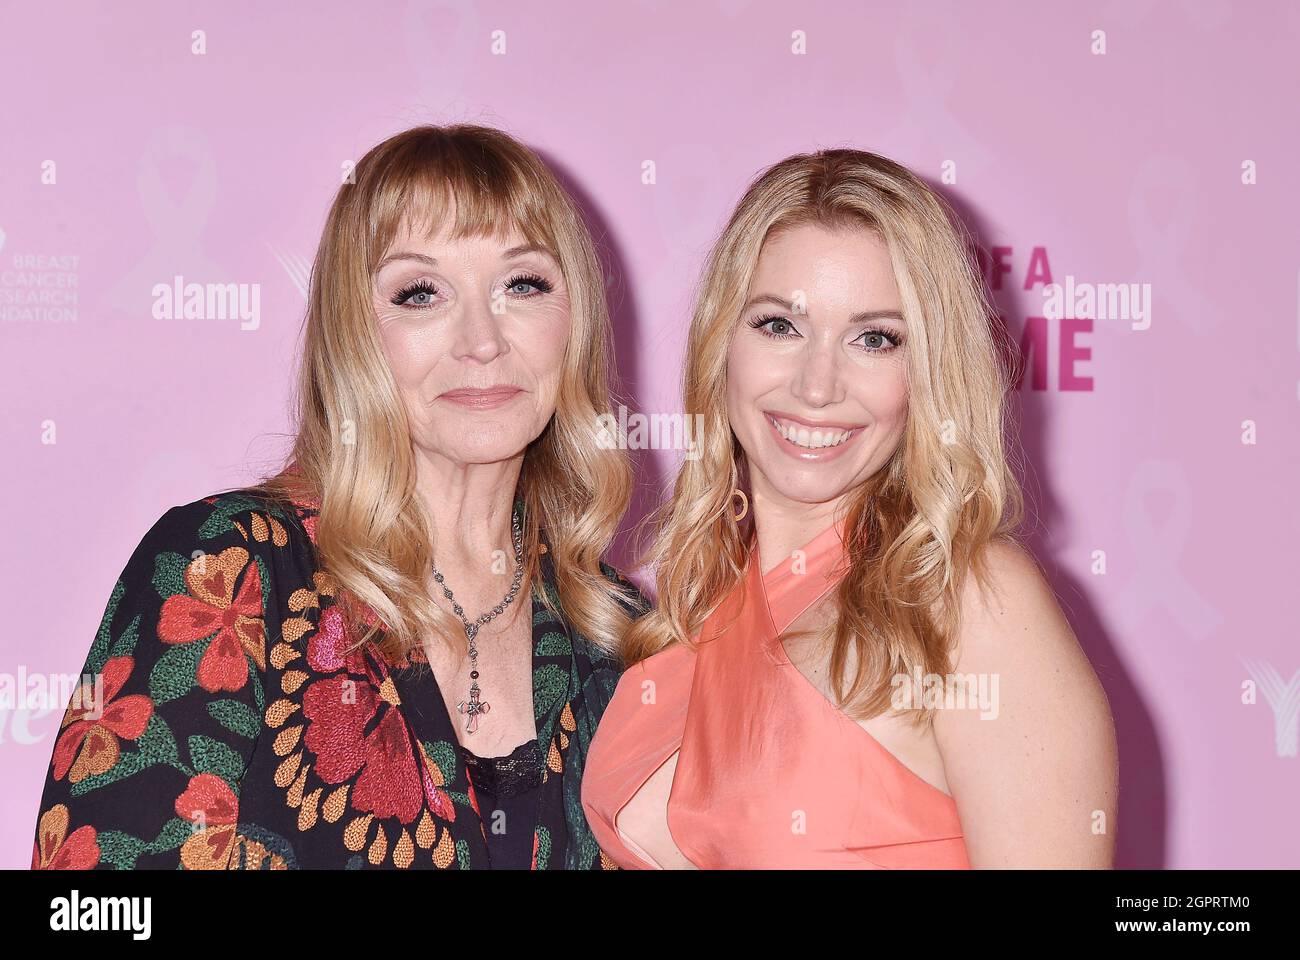 LOS ANGELES, CA - SEPTEMBER 29: Donna Federici (L) and Autumn Federici  attend the premiere of "List of a Lifetime" at the CGV Cinemas Movie  Theater on Stock Photo - Alamy